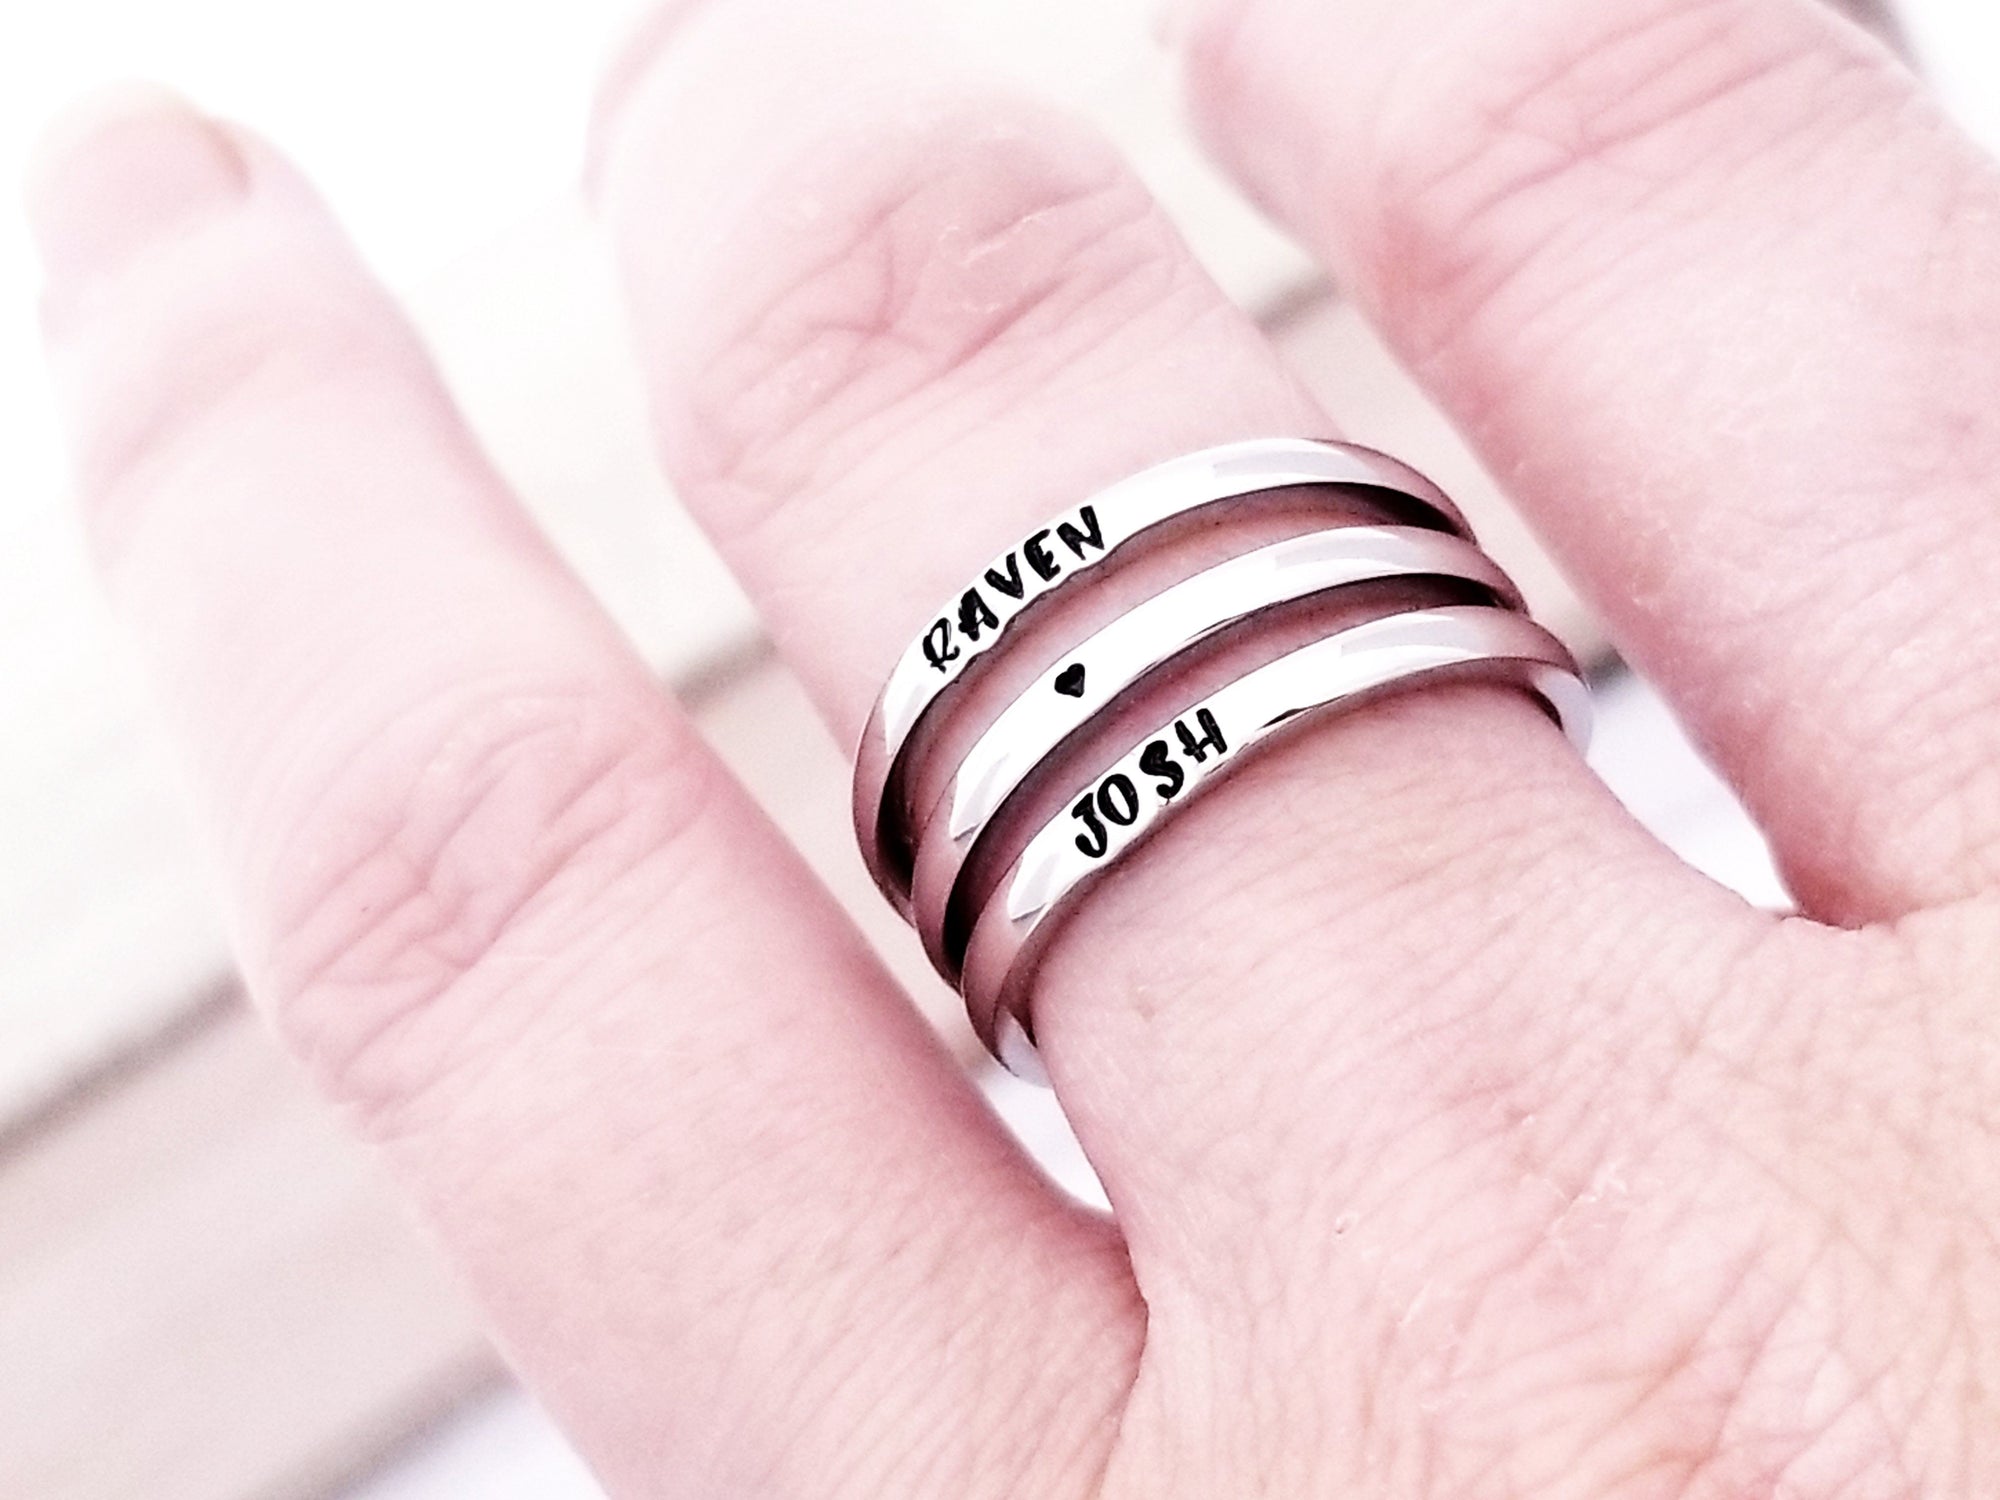 Amazon.com: Rings for Couples Customize, Engraved 